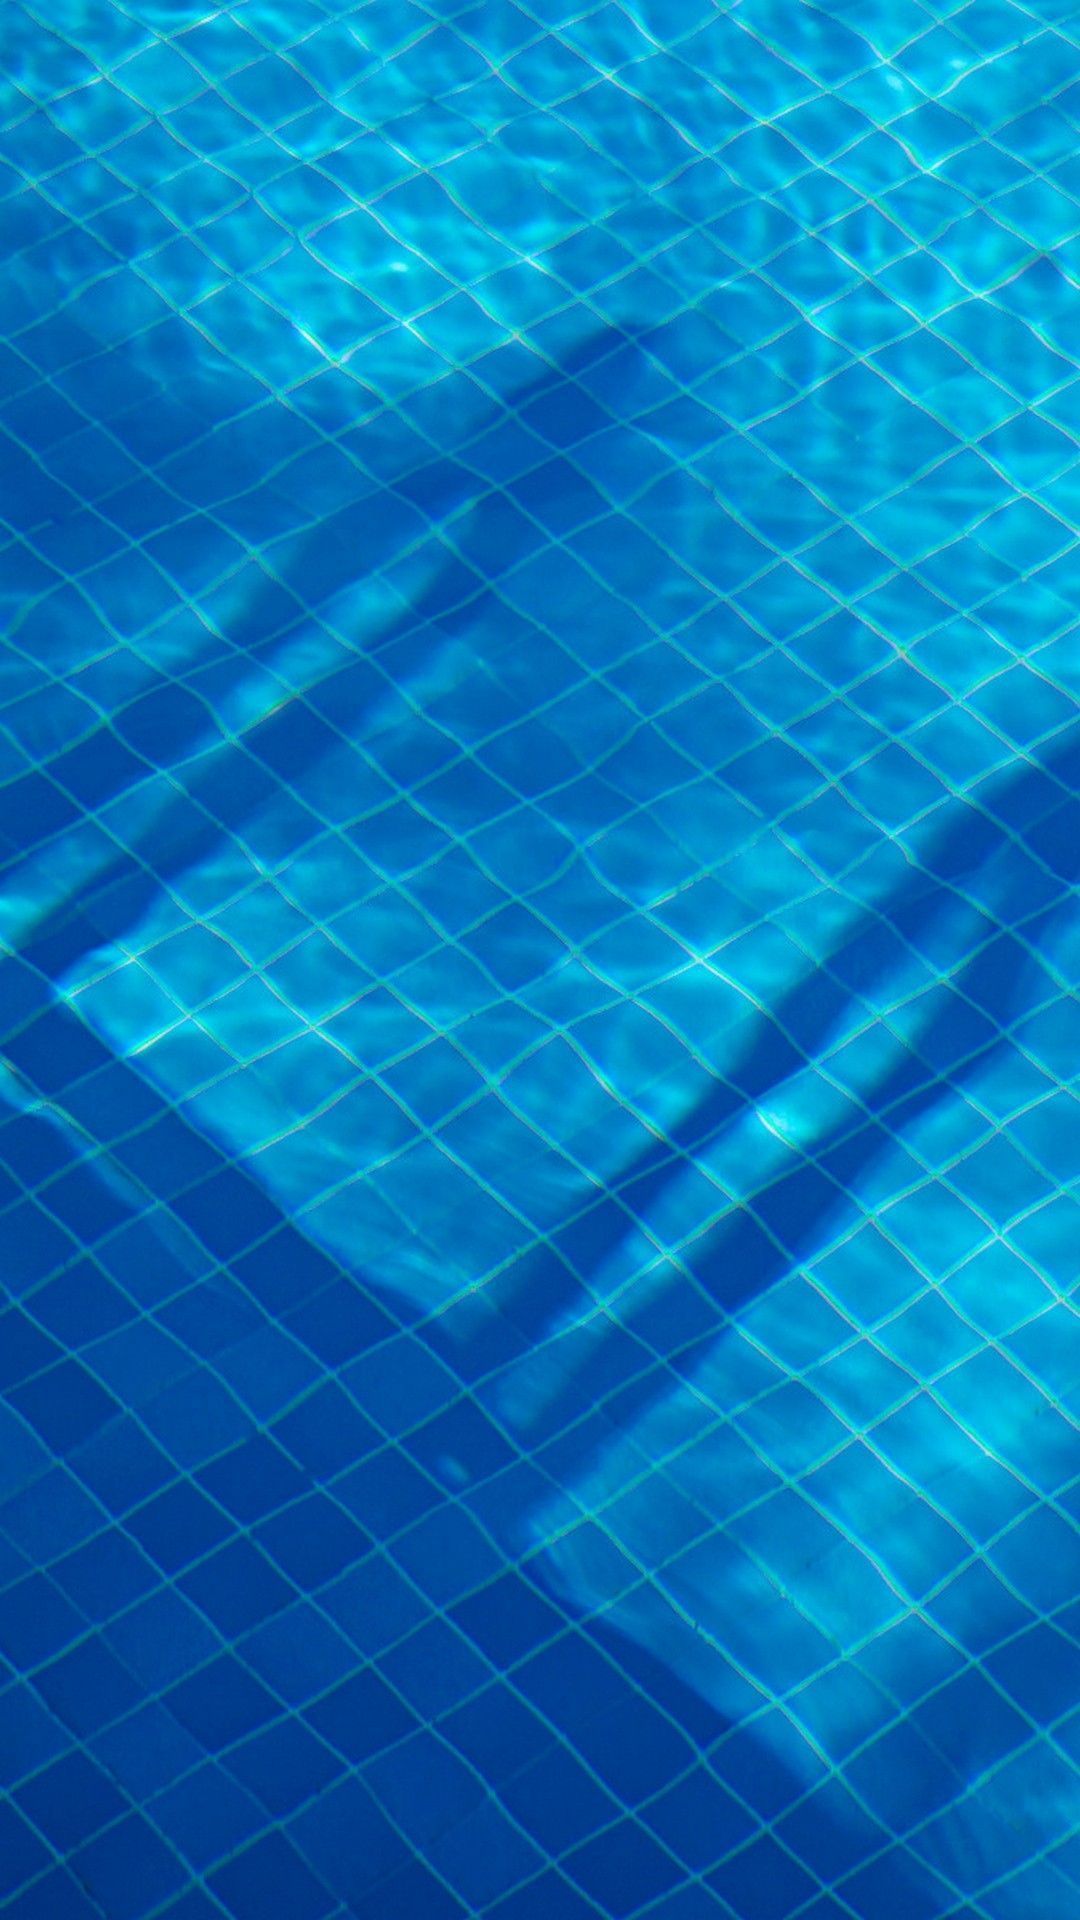 Blue swimming pool water iPhone 8 wallpaper with high-resolution 1080x1920 pixel. You can use this wallpaper for your iPhone 5, 6, 7, 8, X, XS, XR backgrounds, Mobile Screensaver, or iPad Lock Screen - Swimming pool